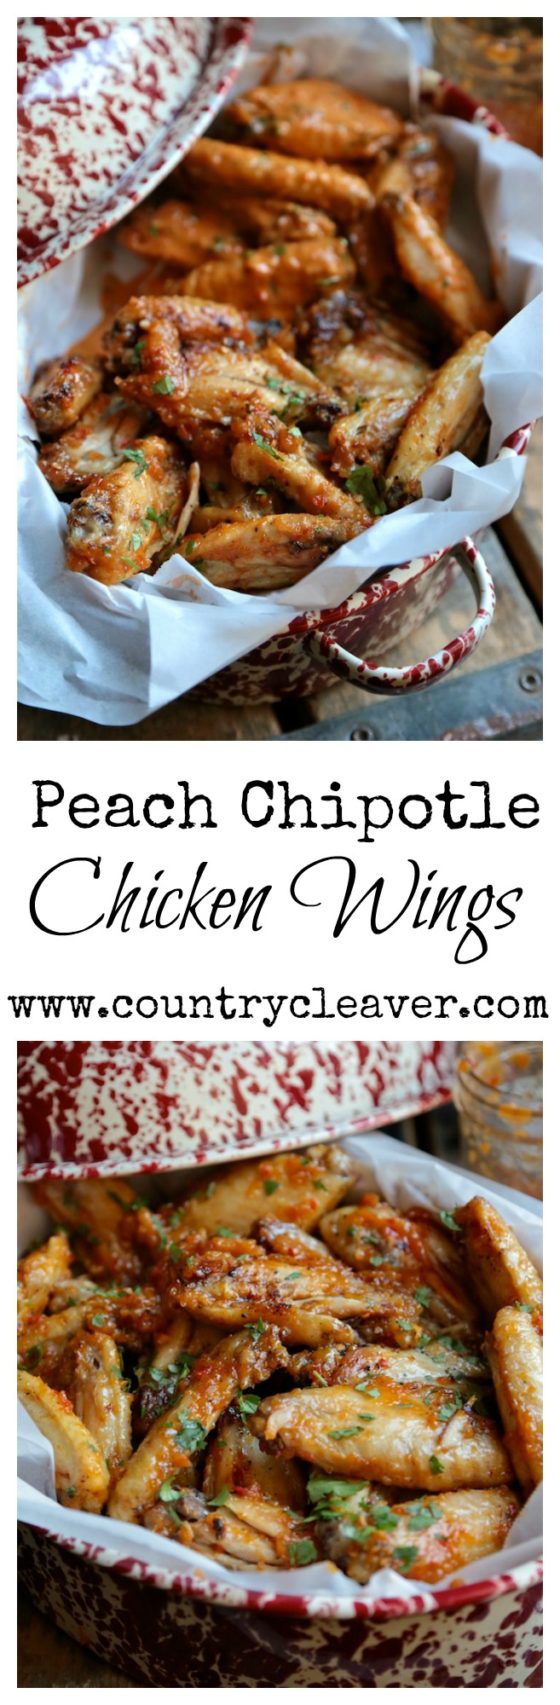 Peach Chipotle Chicken Wings - Make wings at home better than ANY wing place or bar!! With BETTER flavor combinations - www.countrycleaver.com